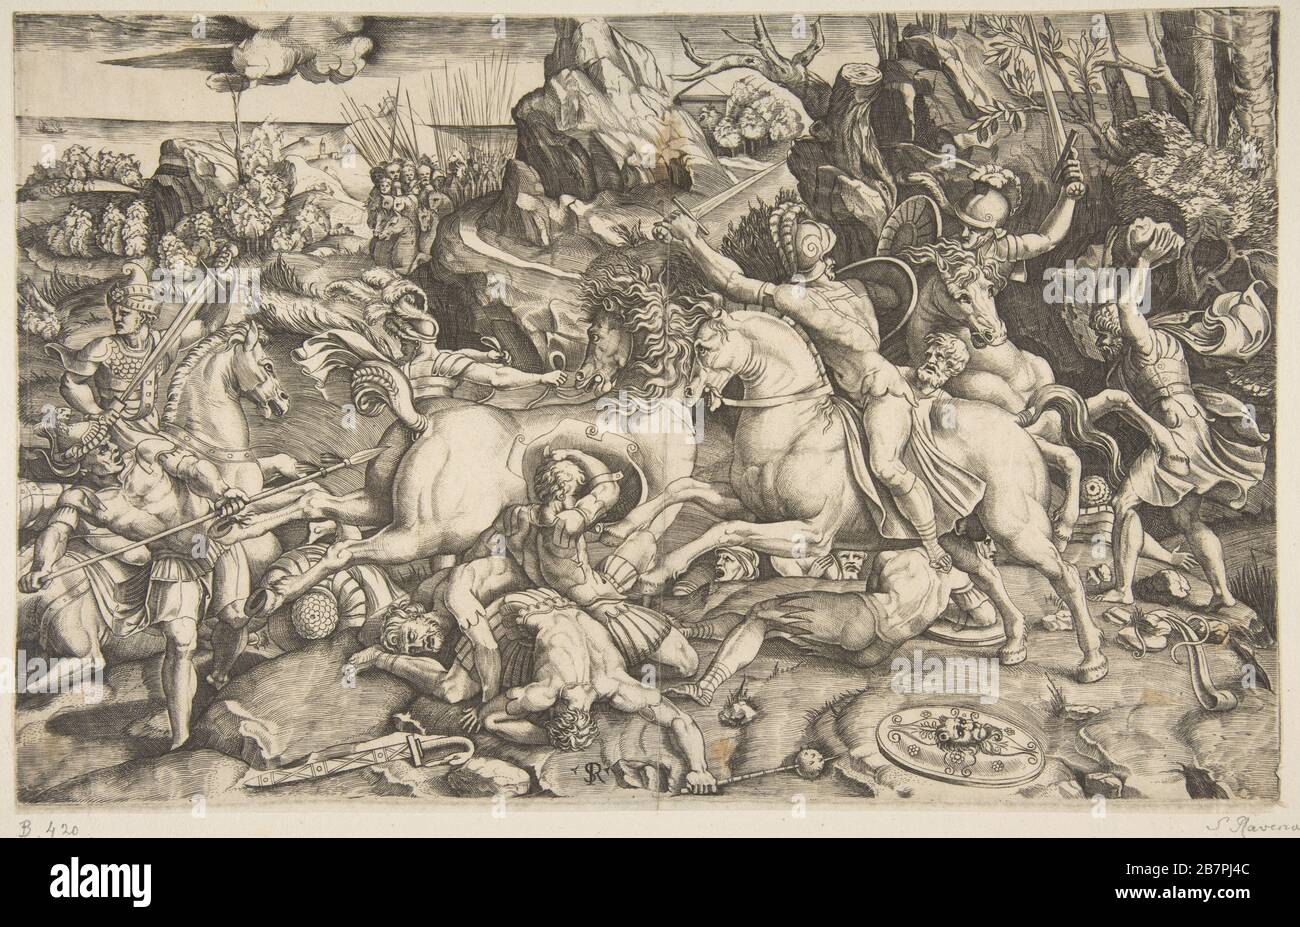 Battle scene in a landscape with soldiers on horseback and several fallen men, another group of riders in the background, ca. 1520. Stock Photo